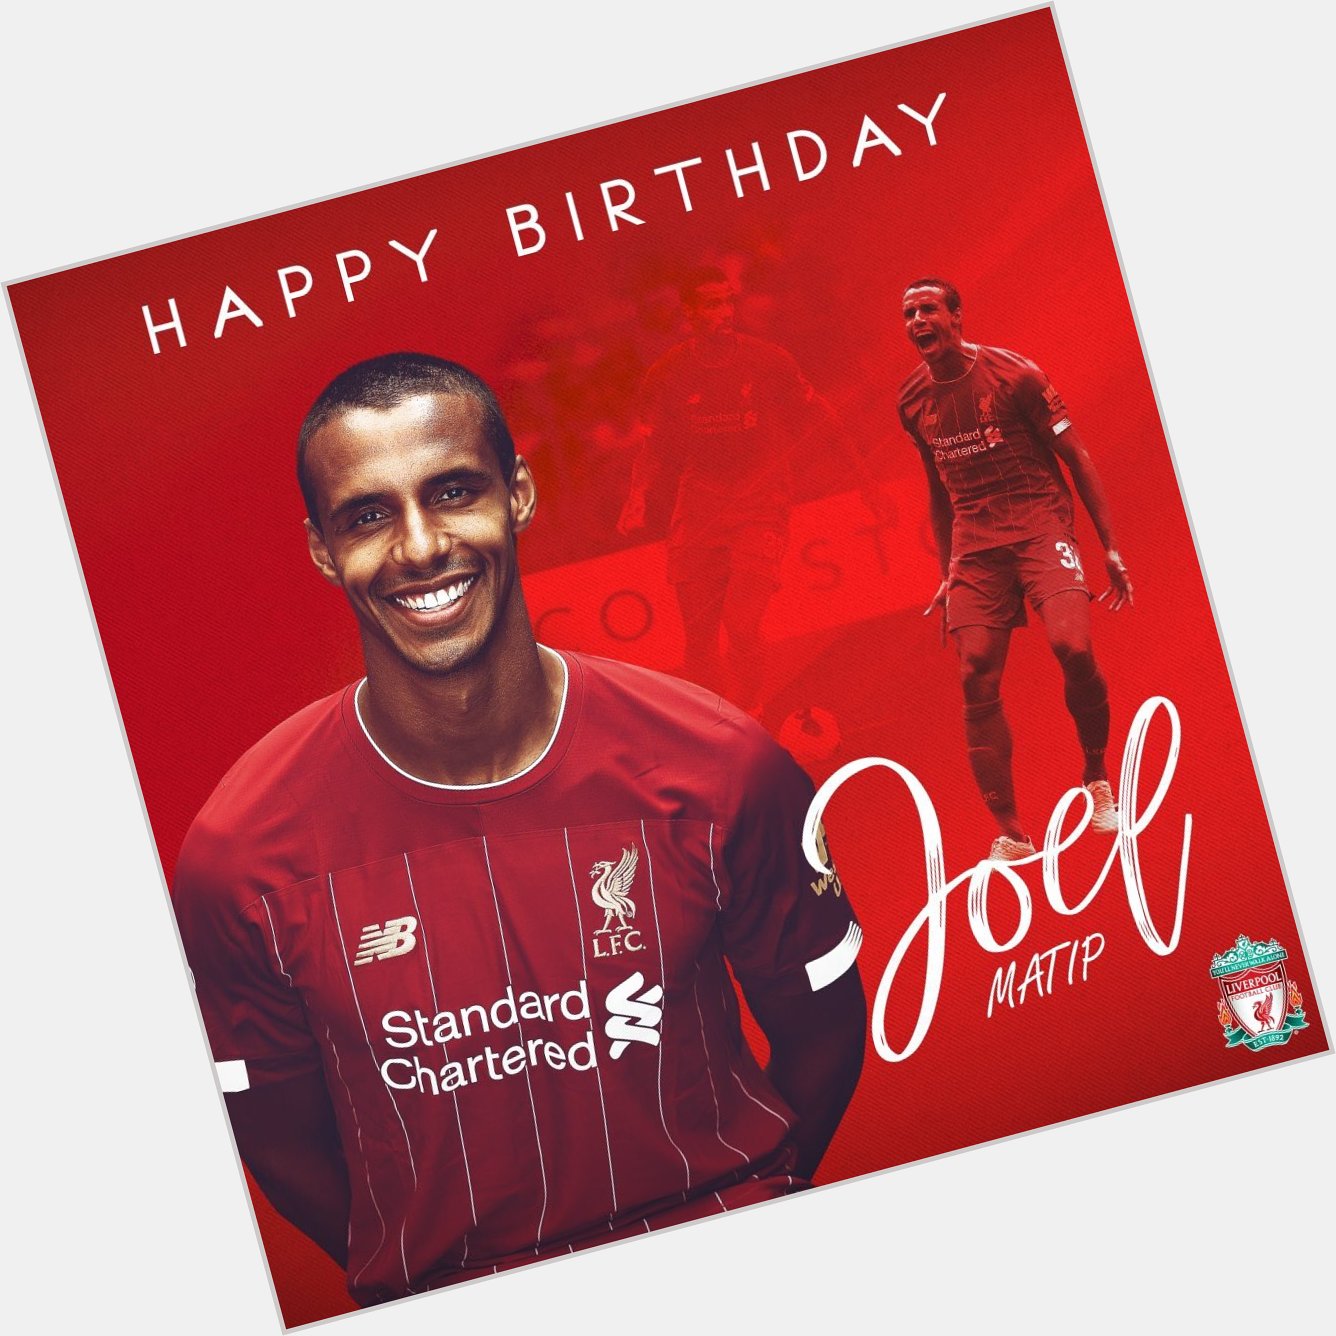 Happy birthday to one of the most underrated CB s of last season, big Joel Matip 